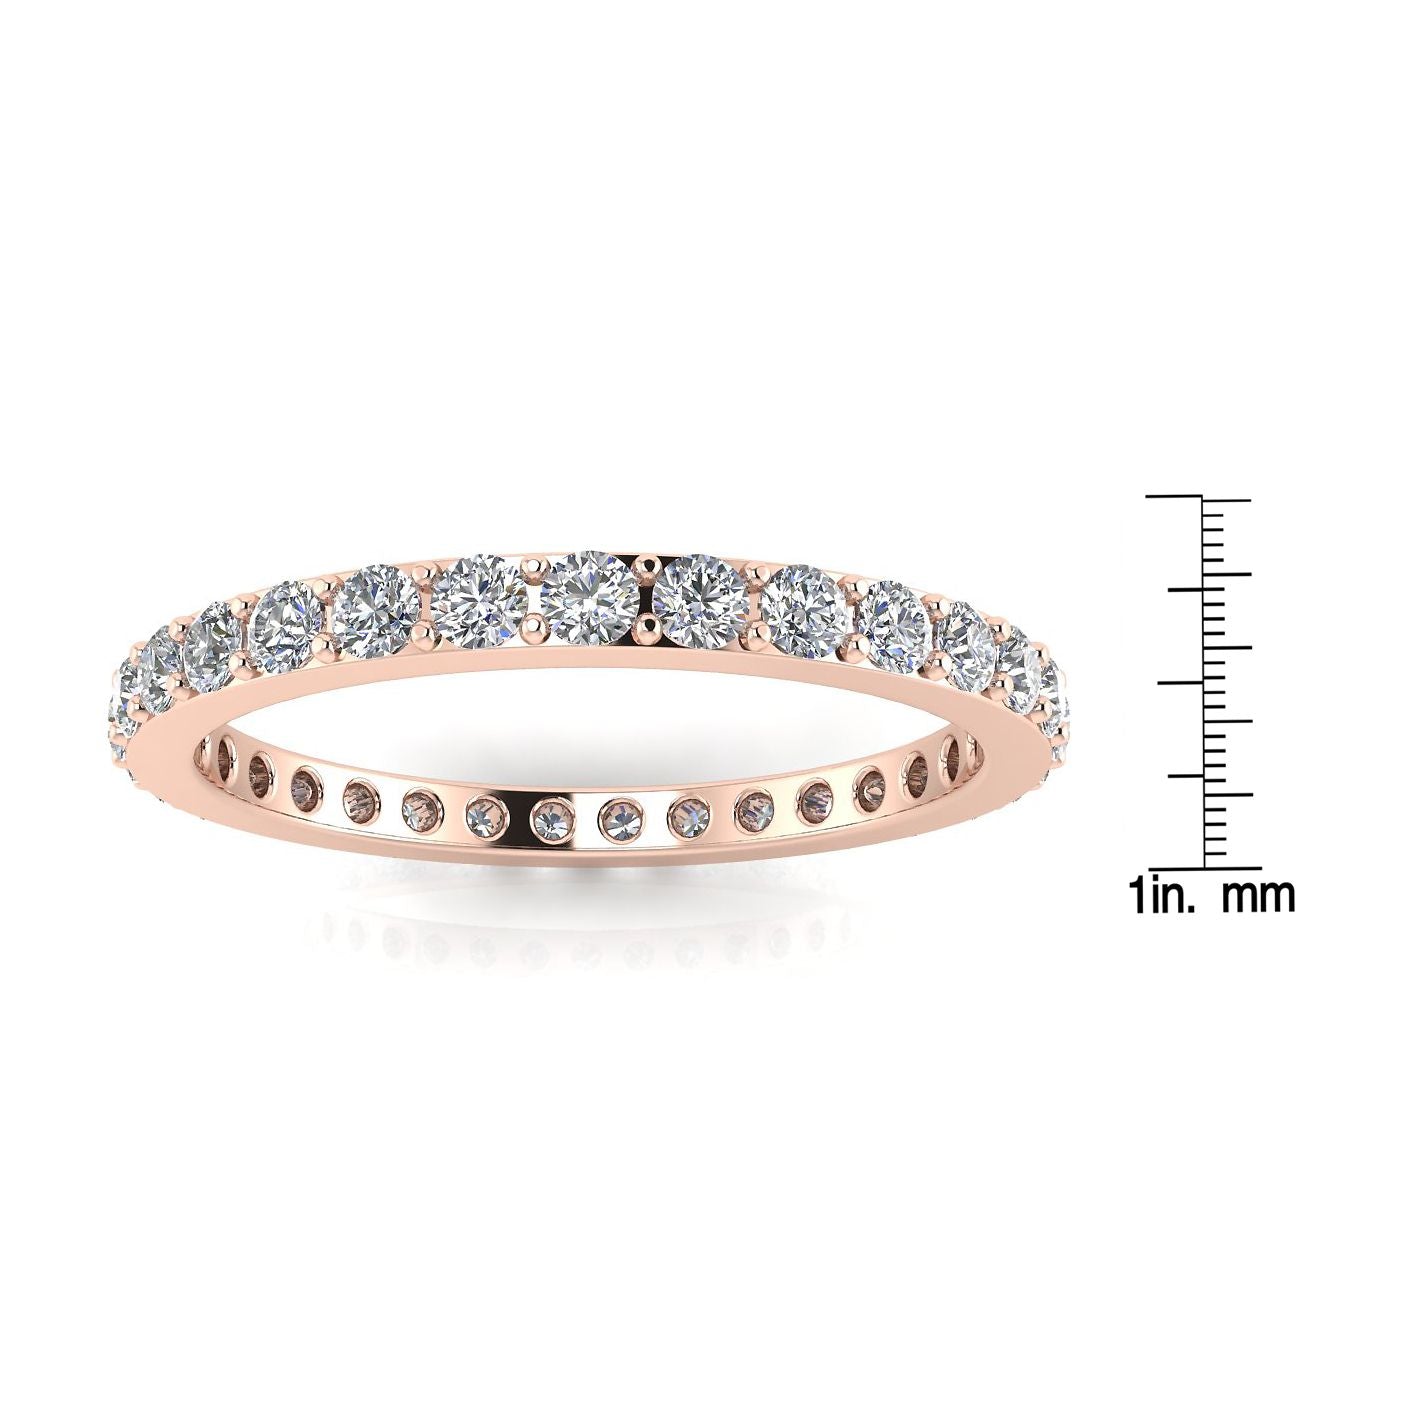 Round Brilliant Cut Diamond Pave Set Eternity Ring In 14k Rose Gold  (0.8ct. Tw.) Ring Size 4